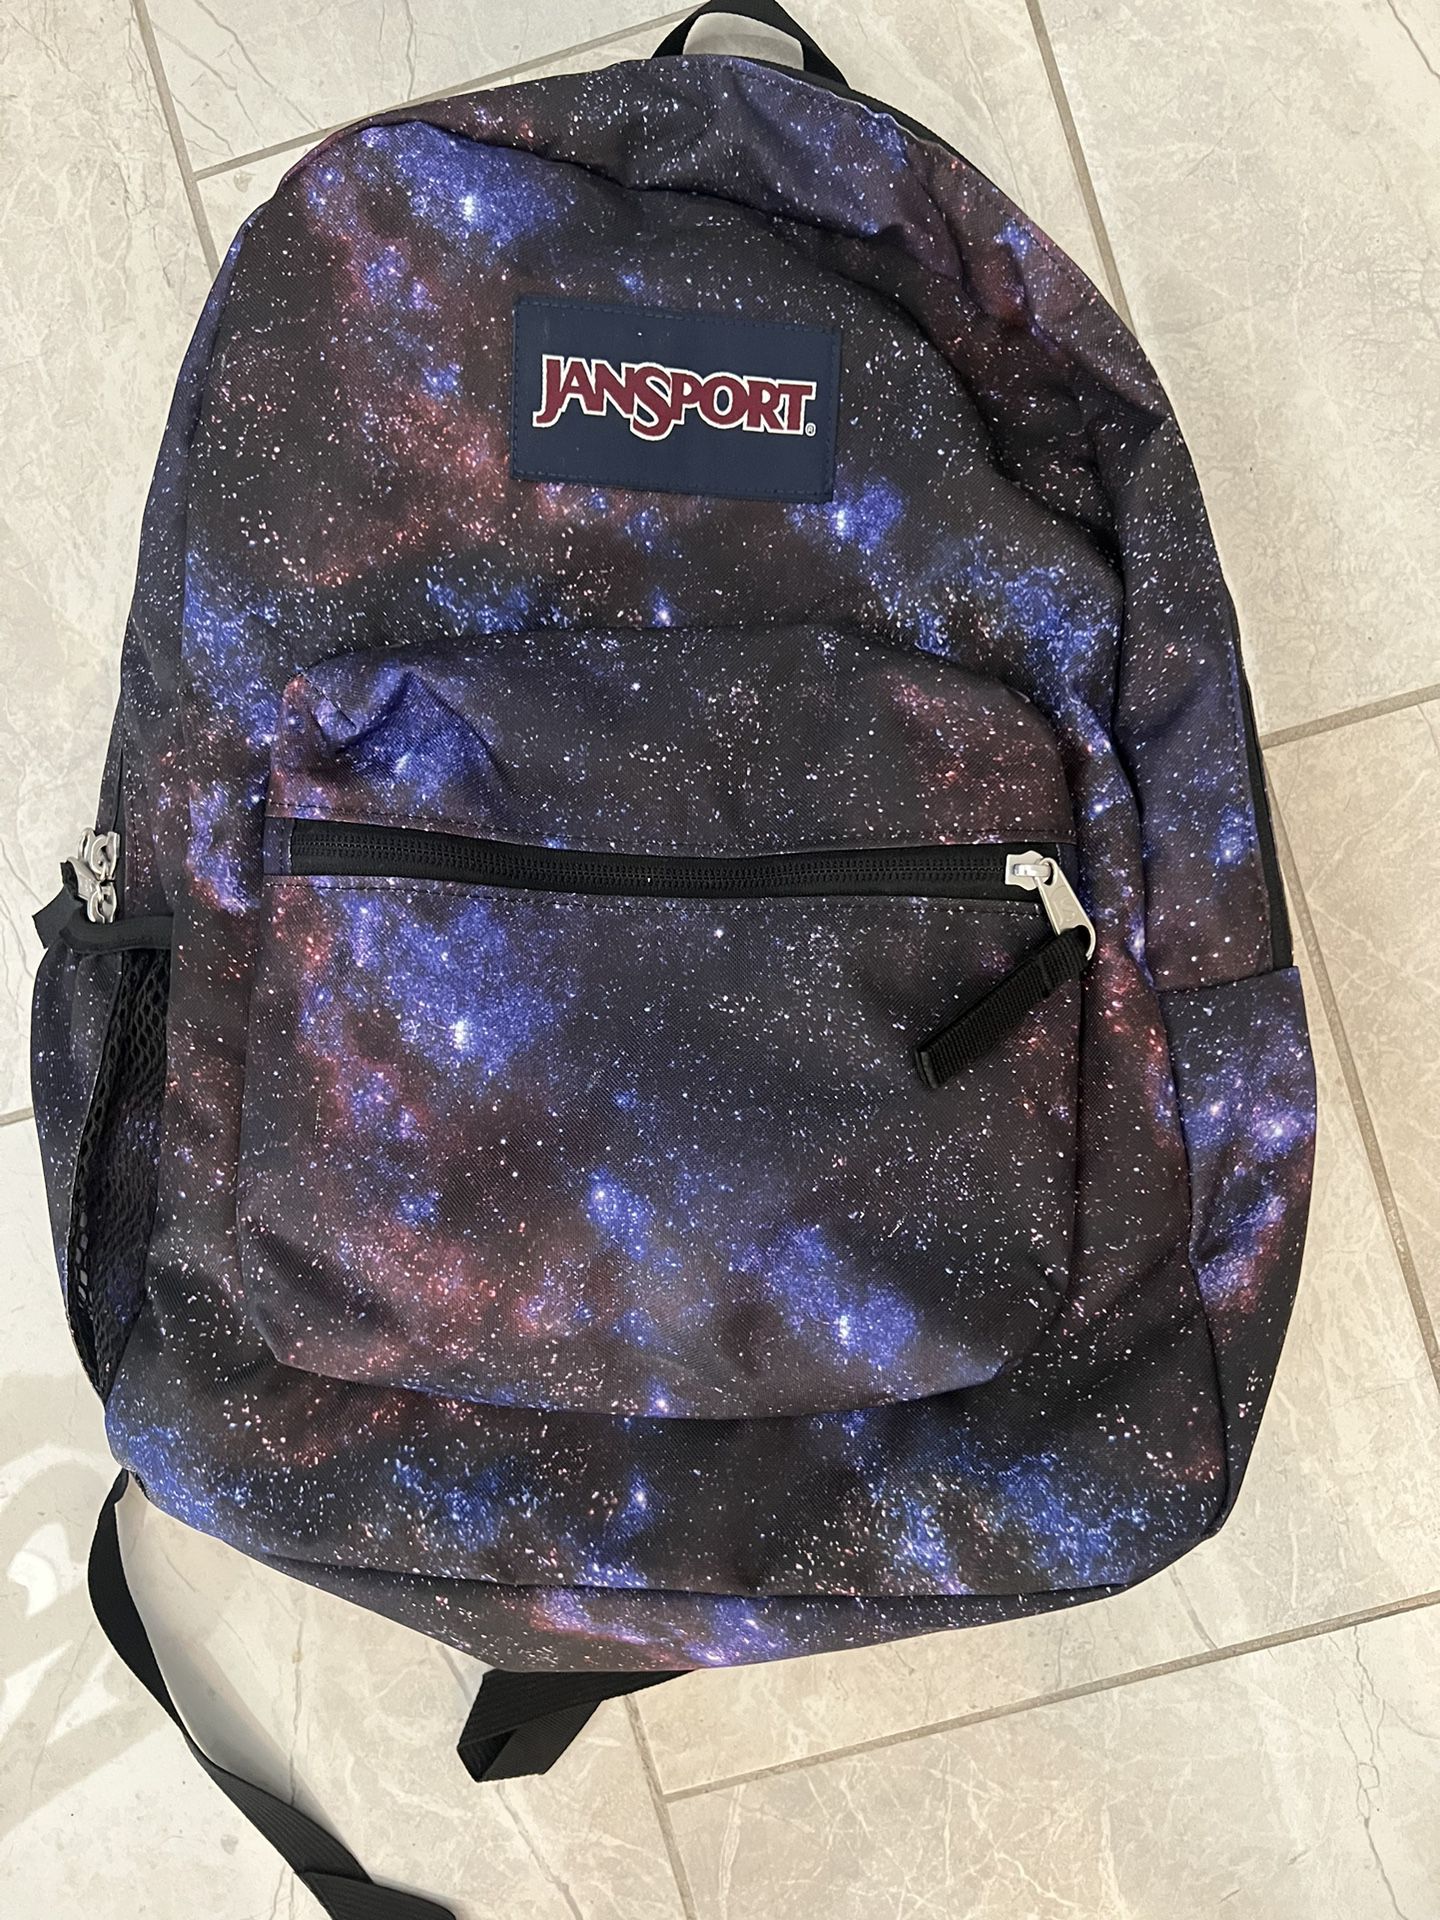 Jansport Galaxy Backpack New